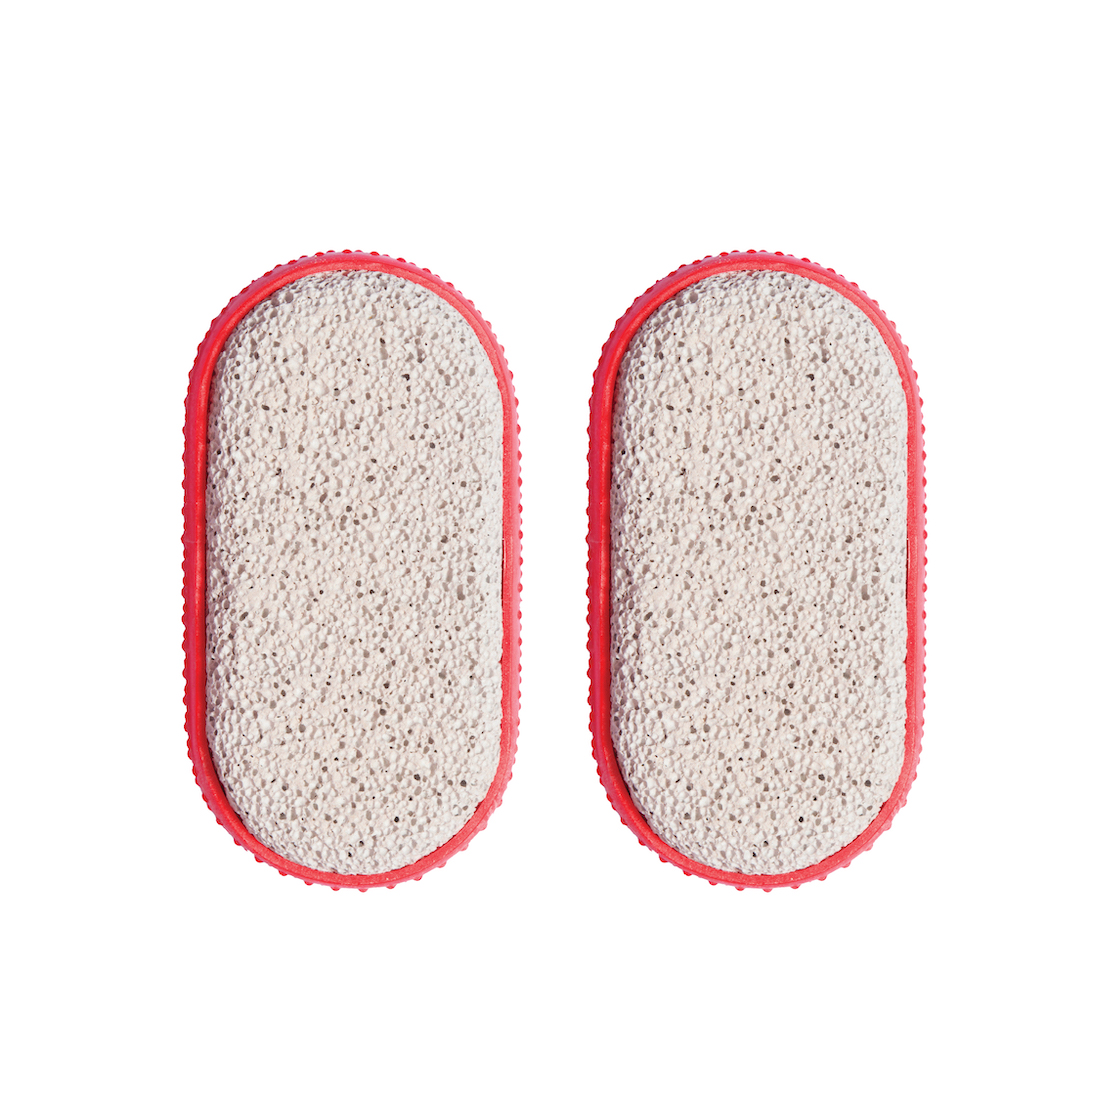 Pumice Stone Pack of 2